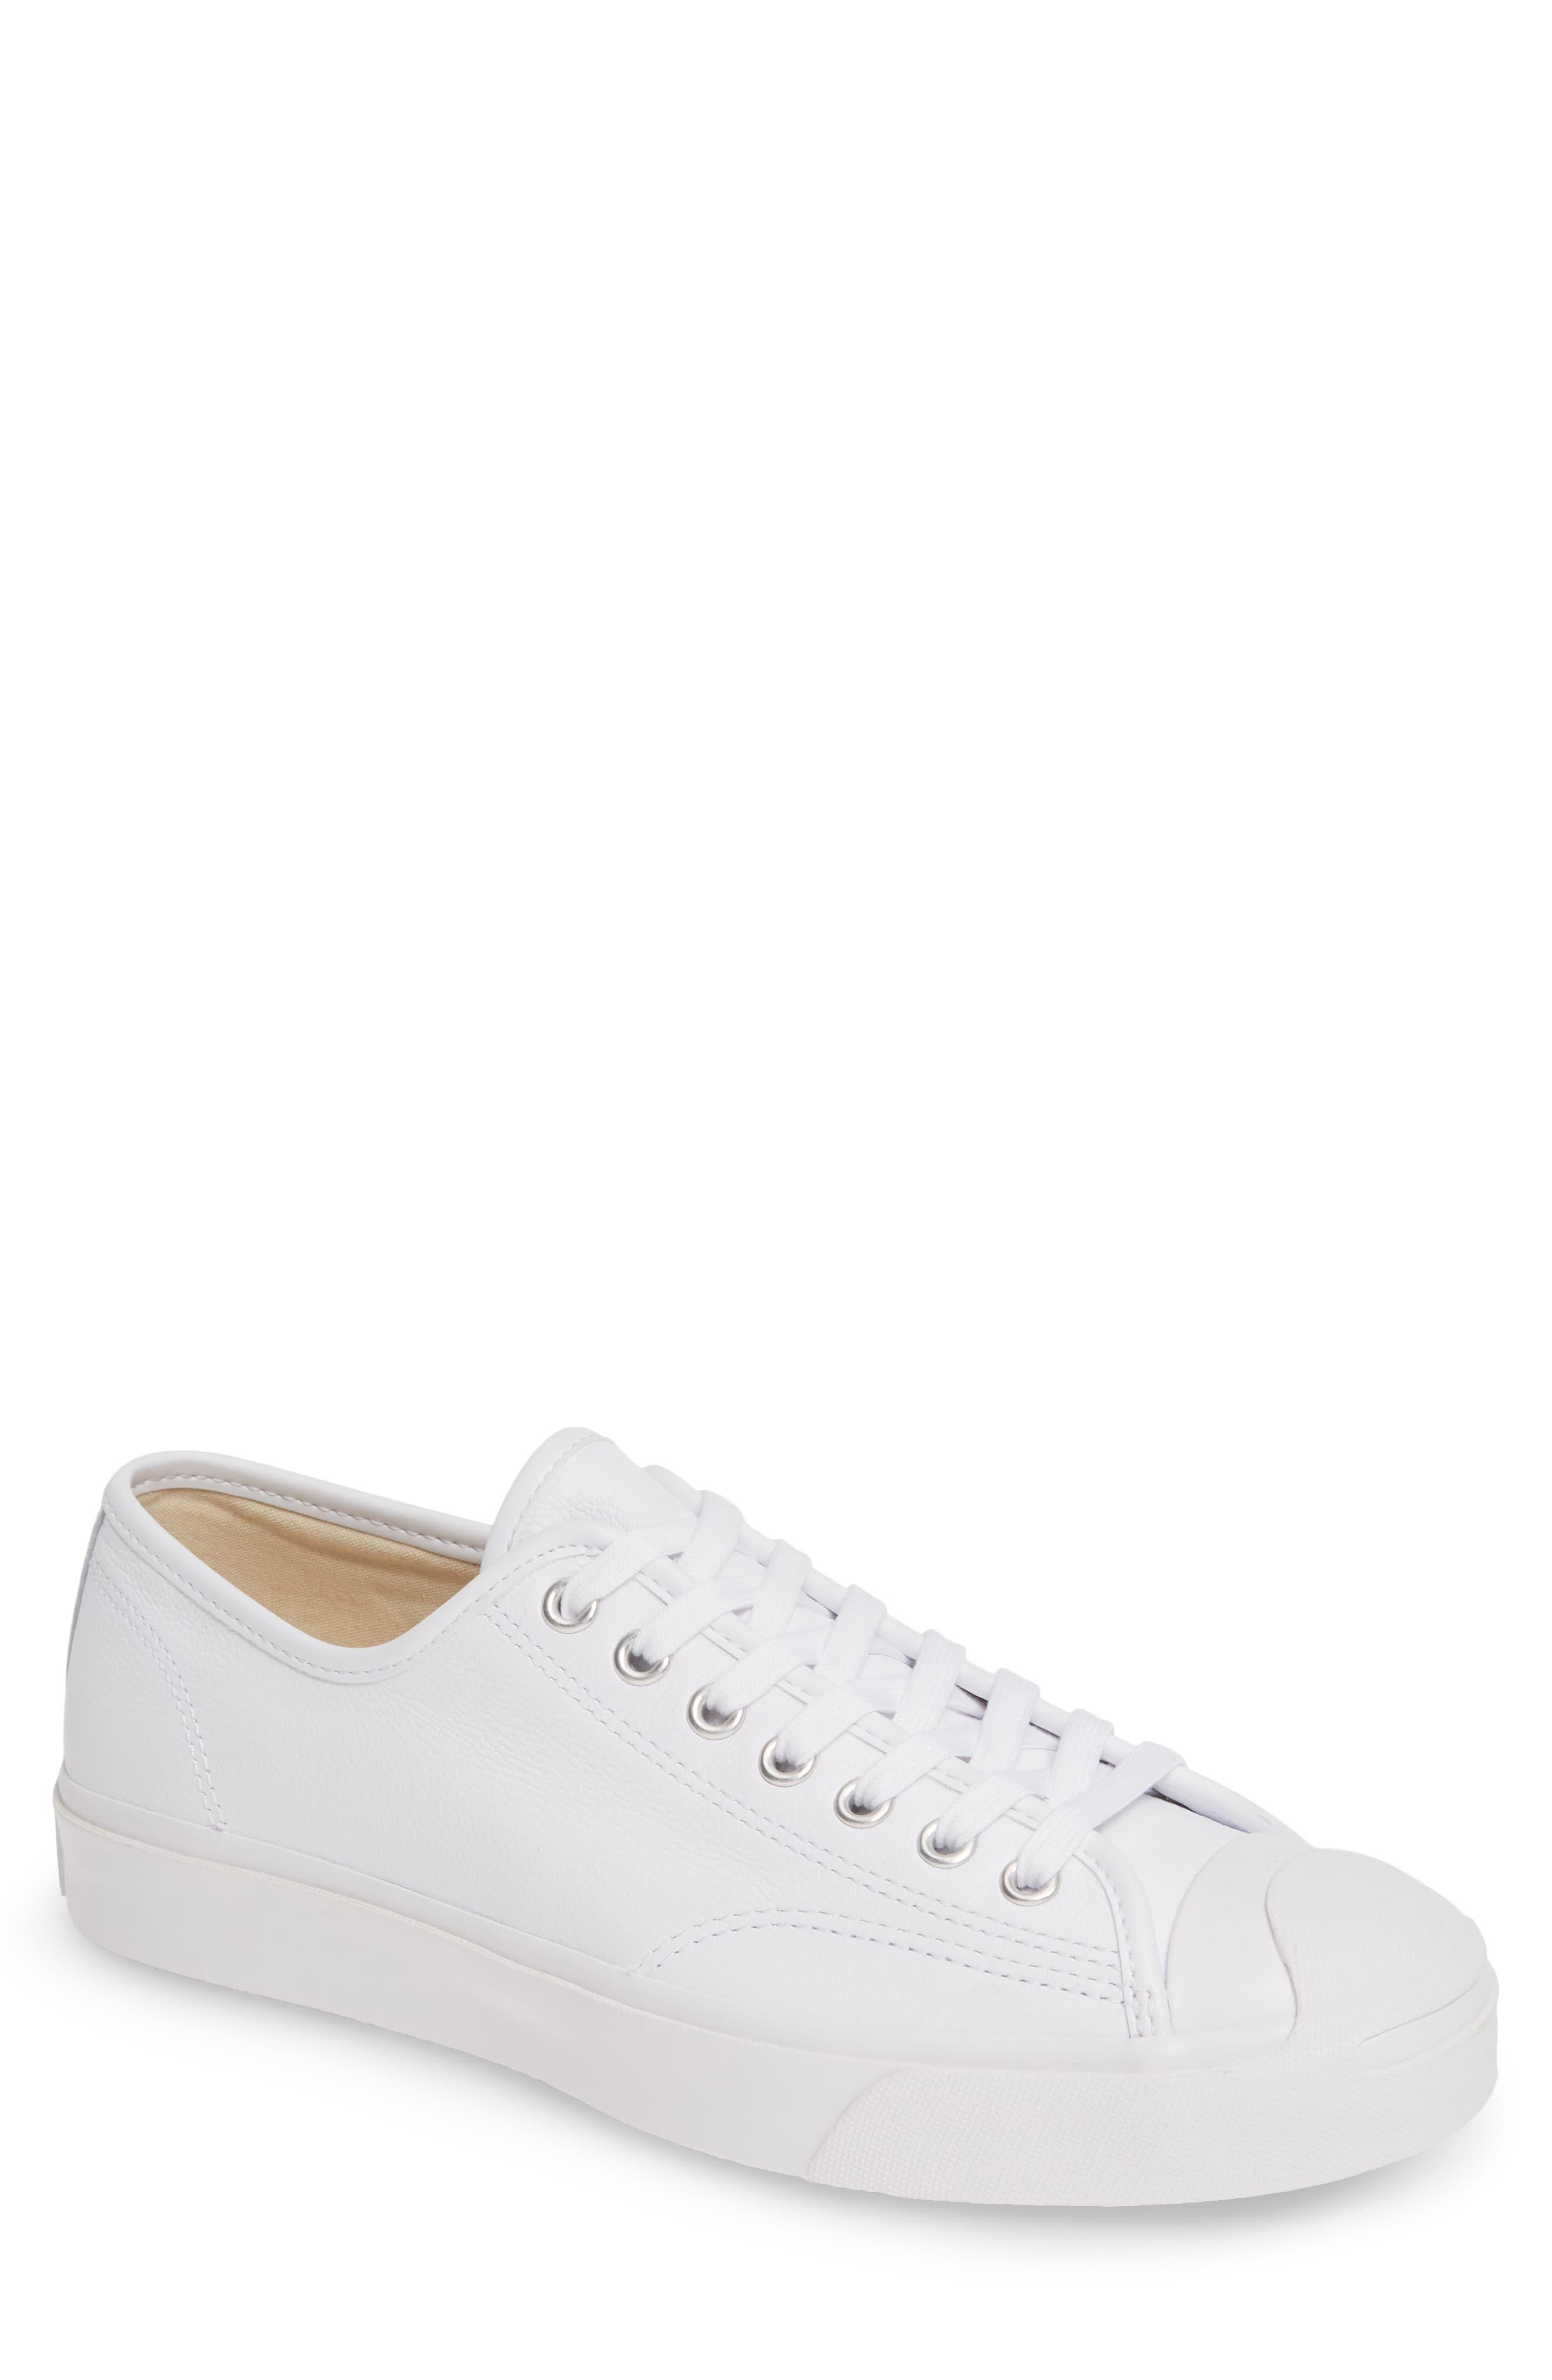 Converse 'jack Purcell' Leather Sneaker in White Leather (White) for ...